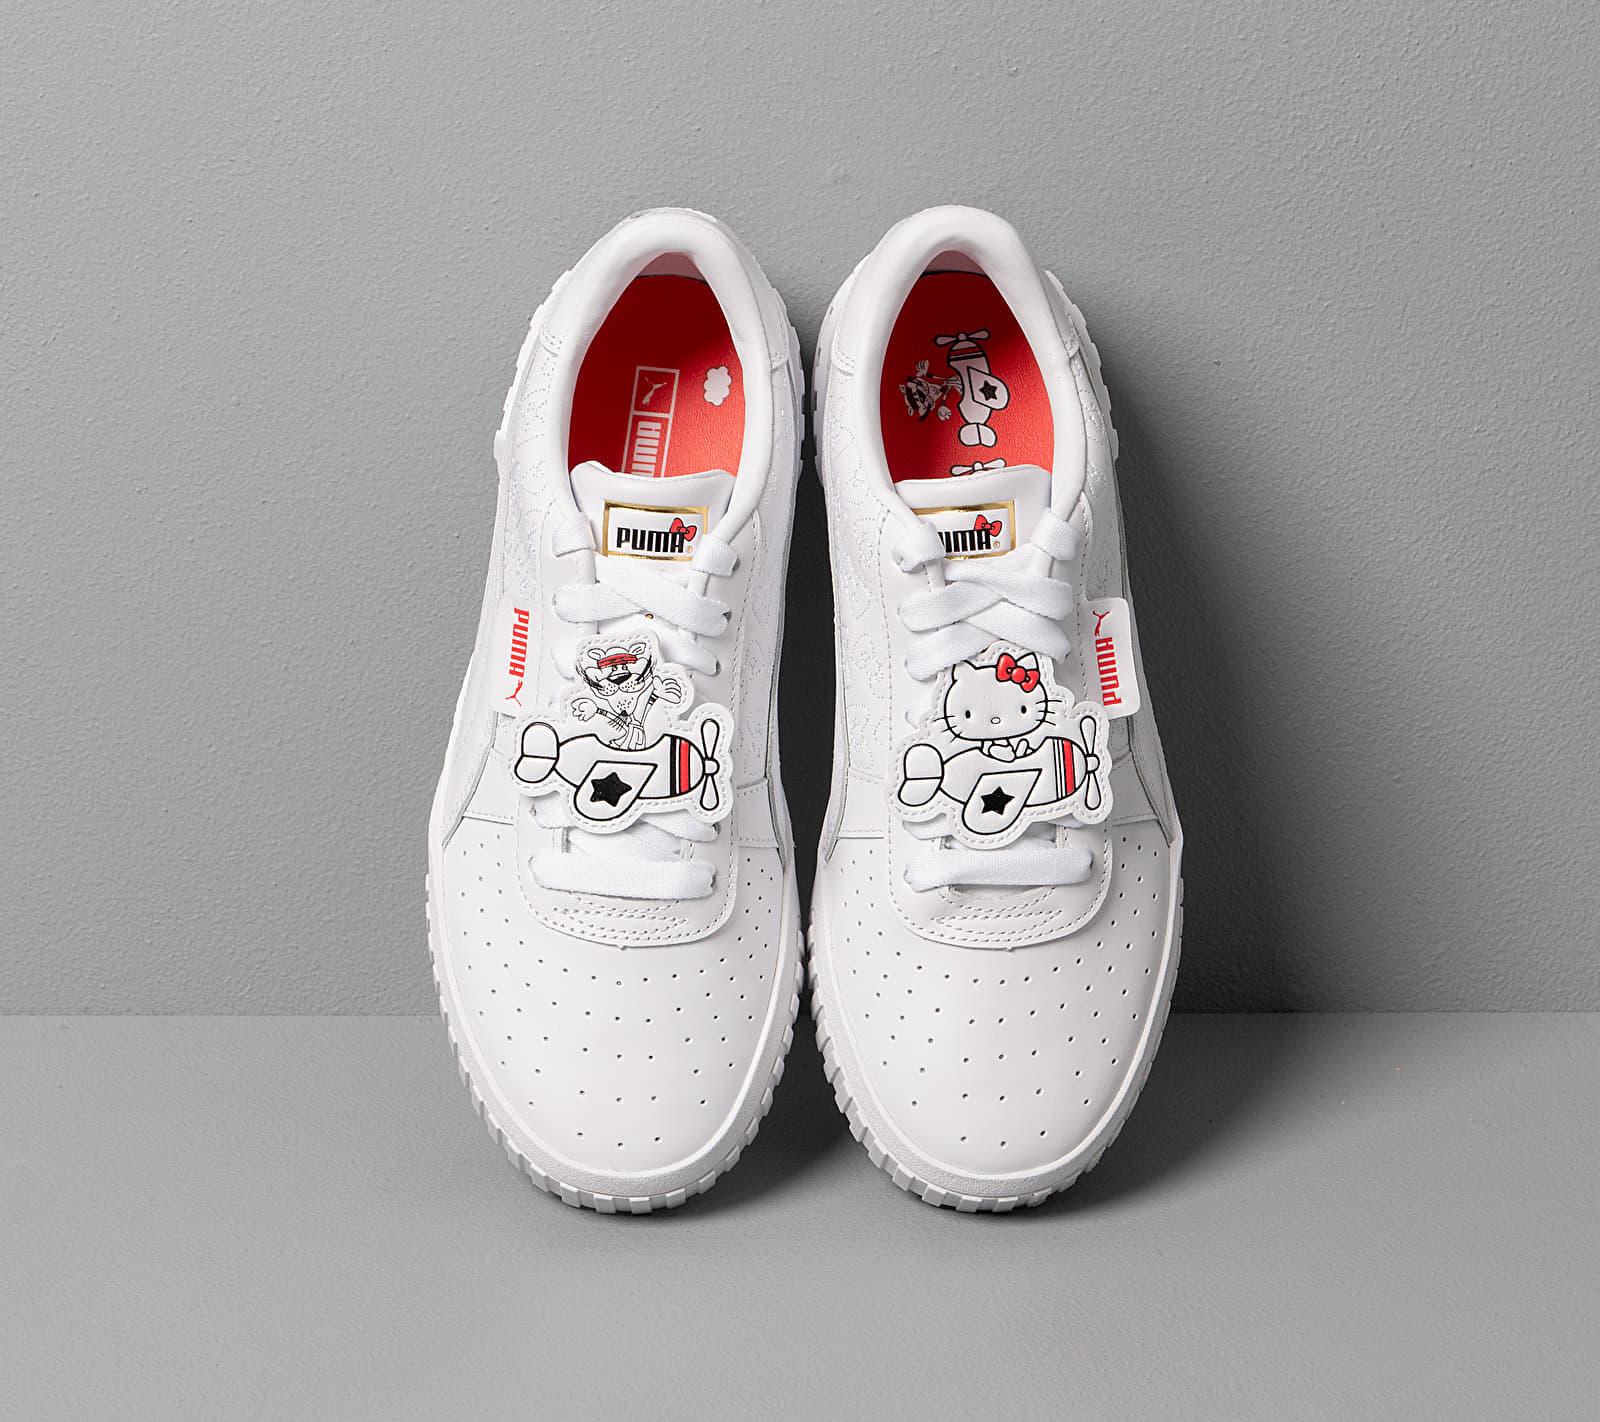 buy > puma x hello kitty cali women's trainers, Up to 69% OFF